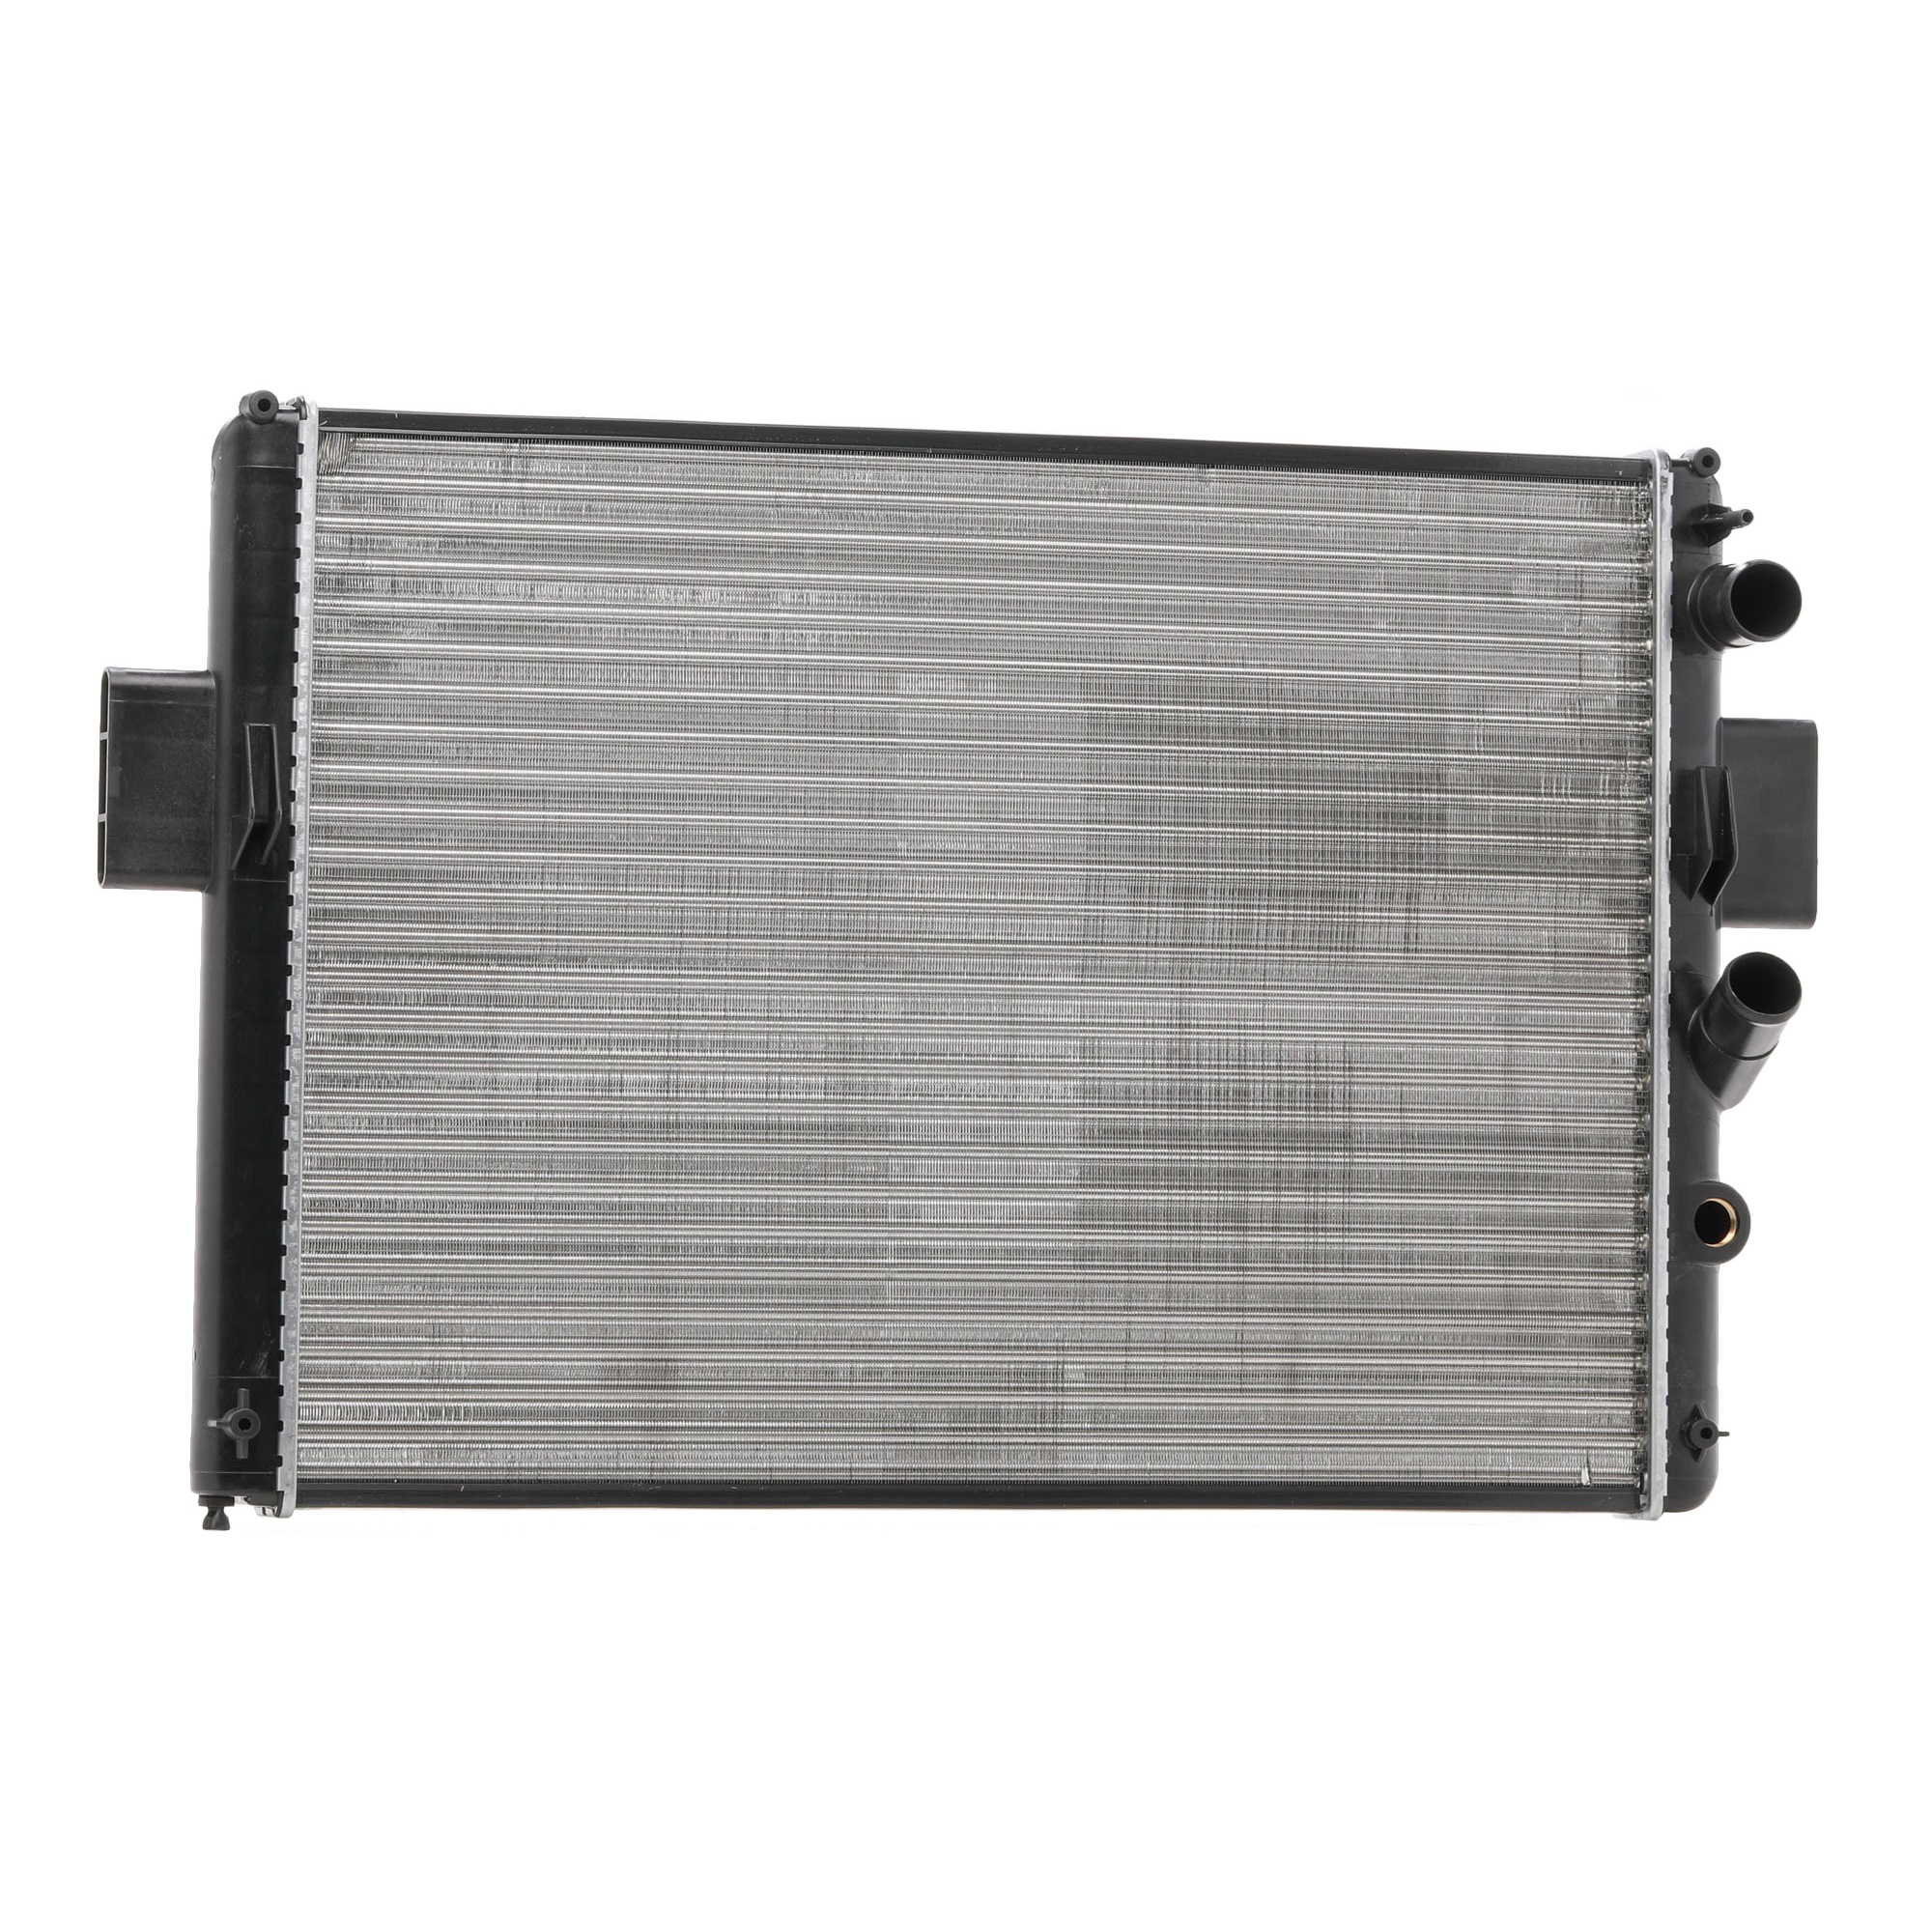 STARK SKRD-0121382 Engine radiator Aluminium, Plastic, for vehicles without air conditioning, without bracket, Manual Transmission